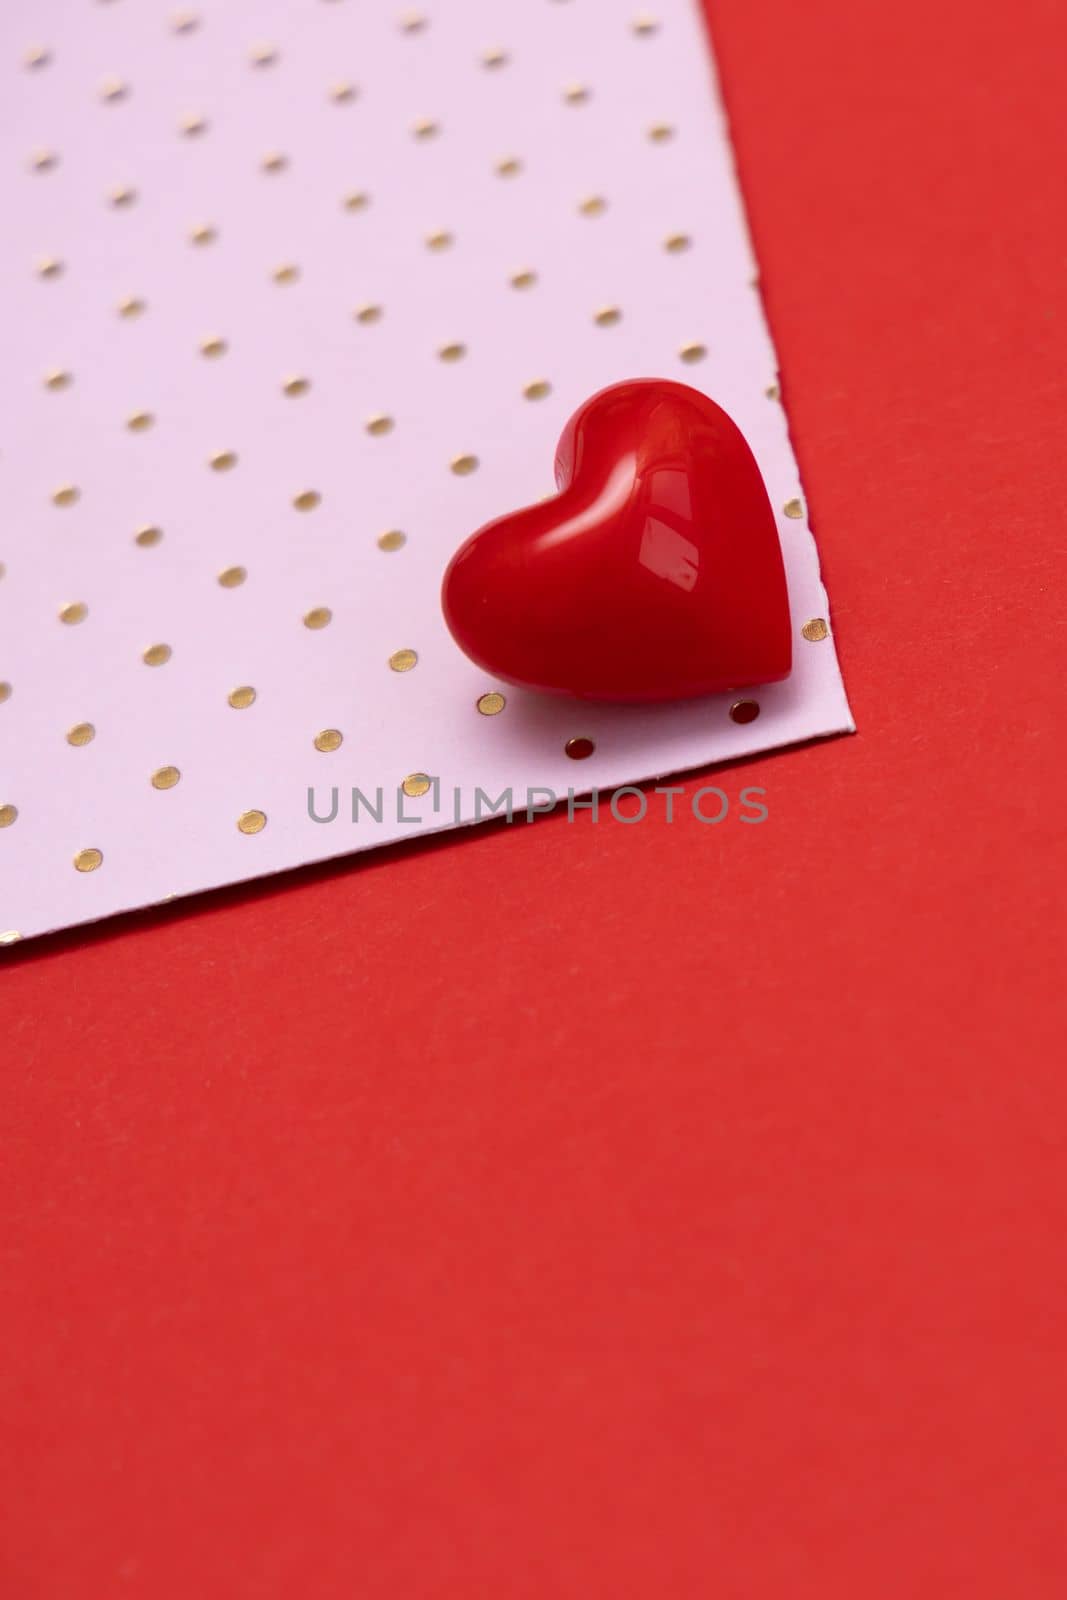 Valentines day red heart on same color background. Monochromatic vivid color. Valentine's day concept. Close up, copy space